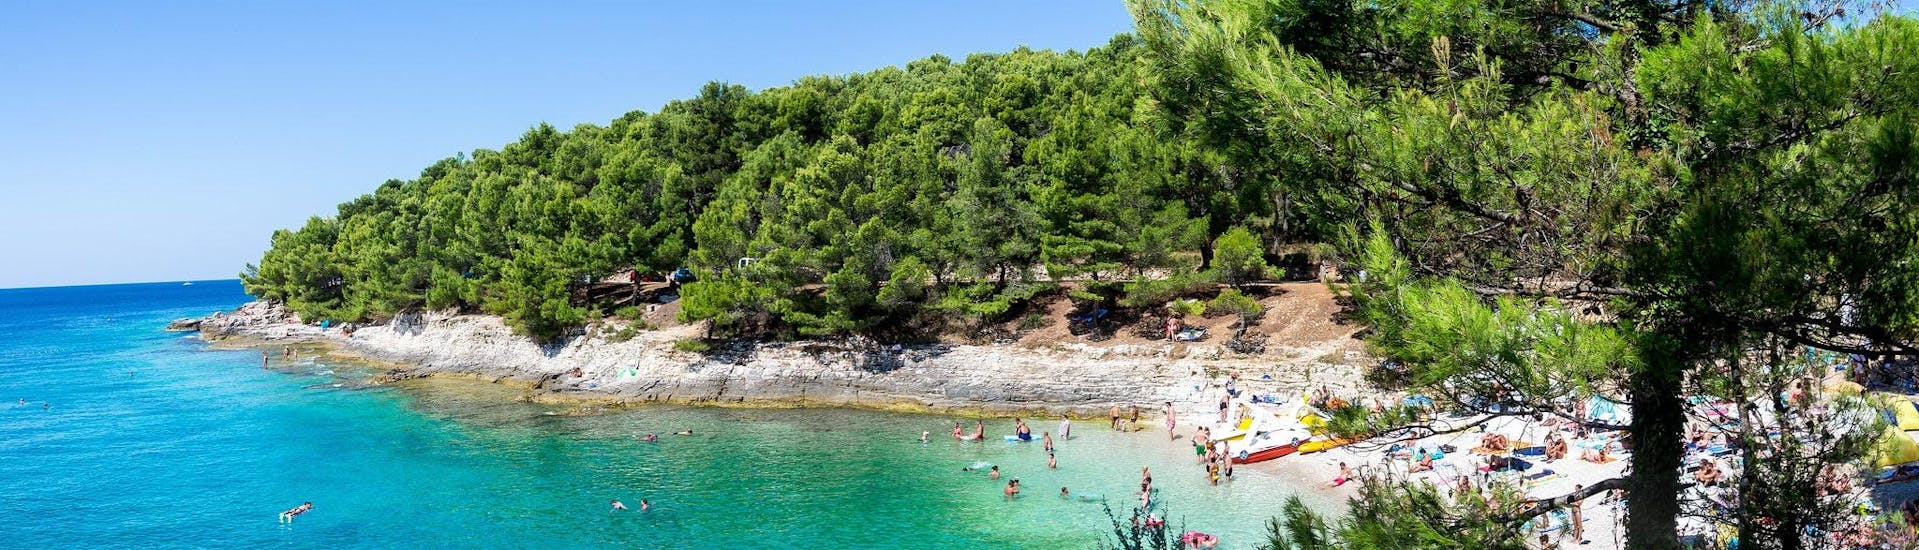 View of a beach at Kap Kamenjak, which is a popular destination for sea kayaking in Pula.